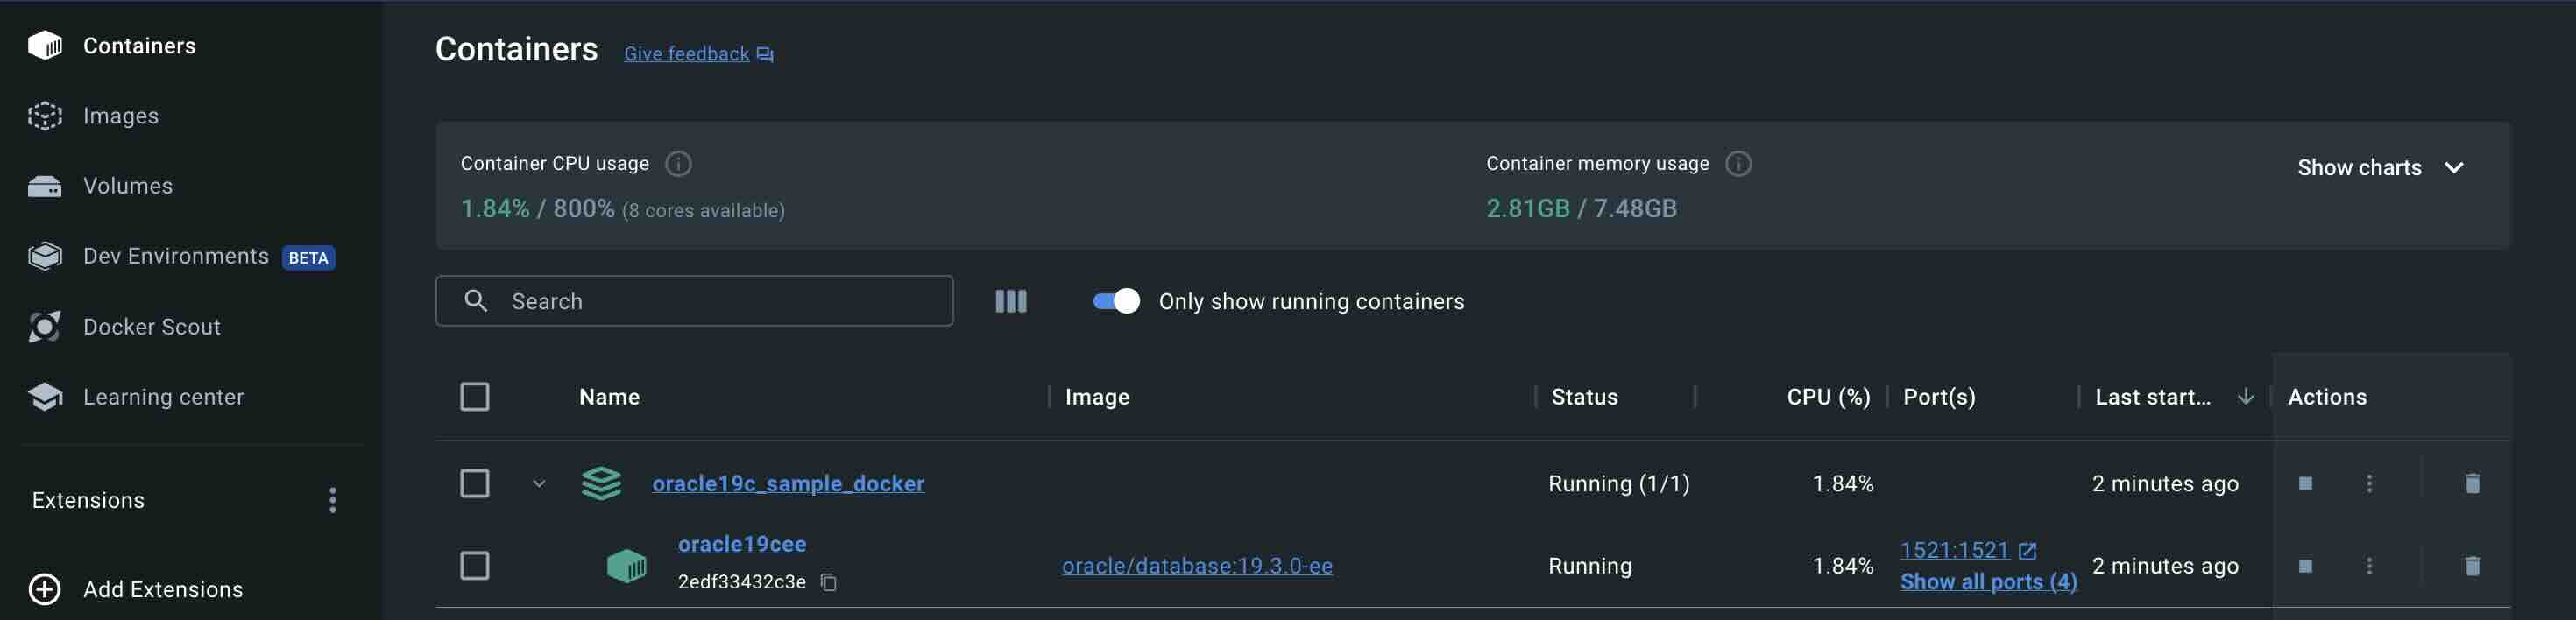 Docker Containers View